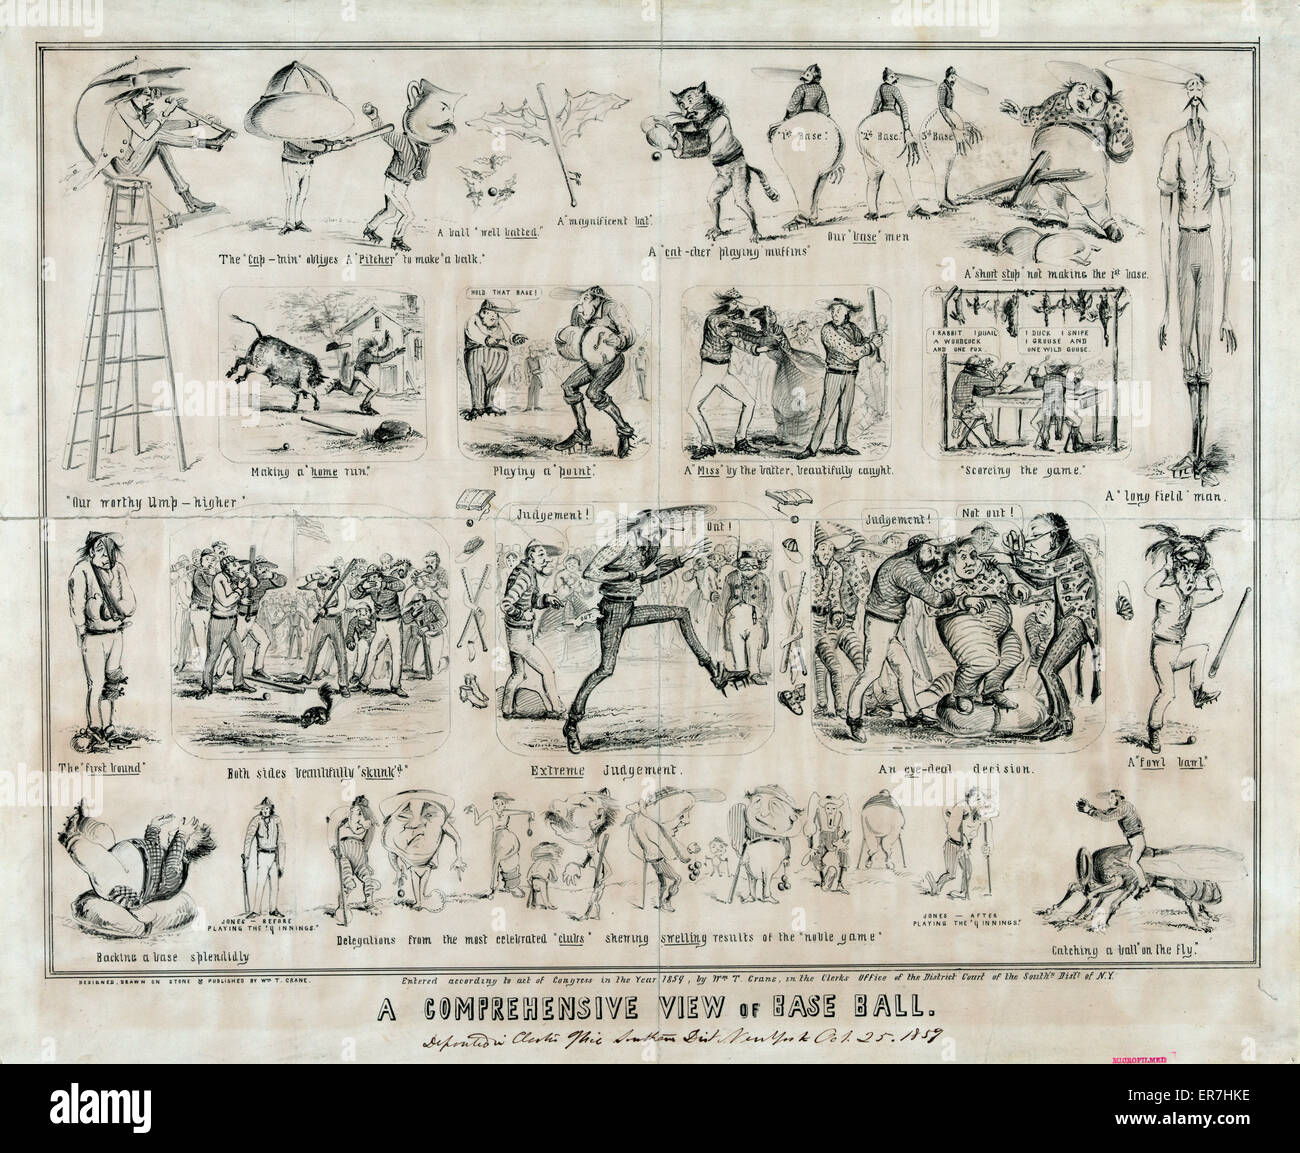 A comprehensive view of base ball. Date c1859 Oct. 25. Stock Photo